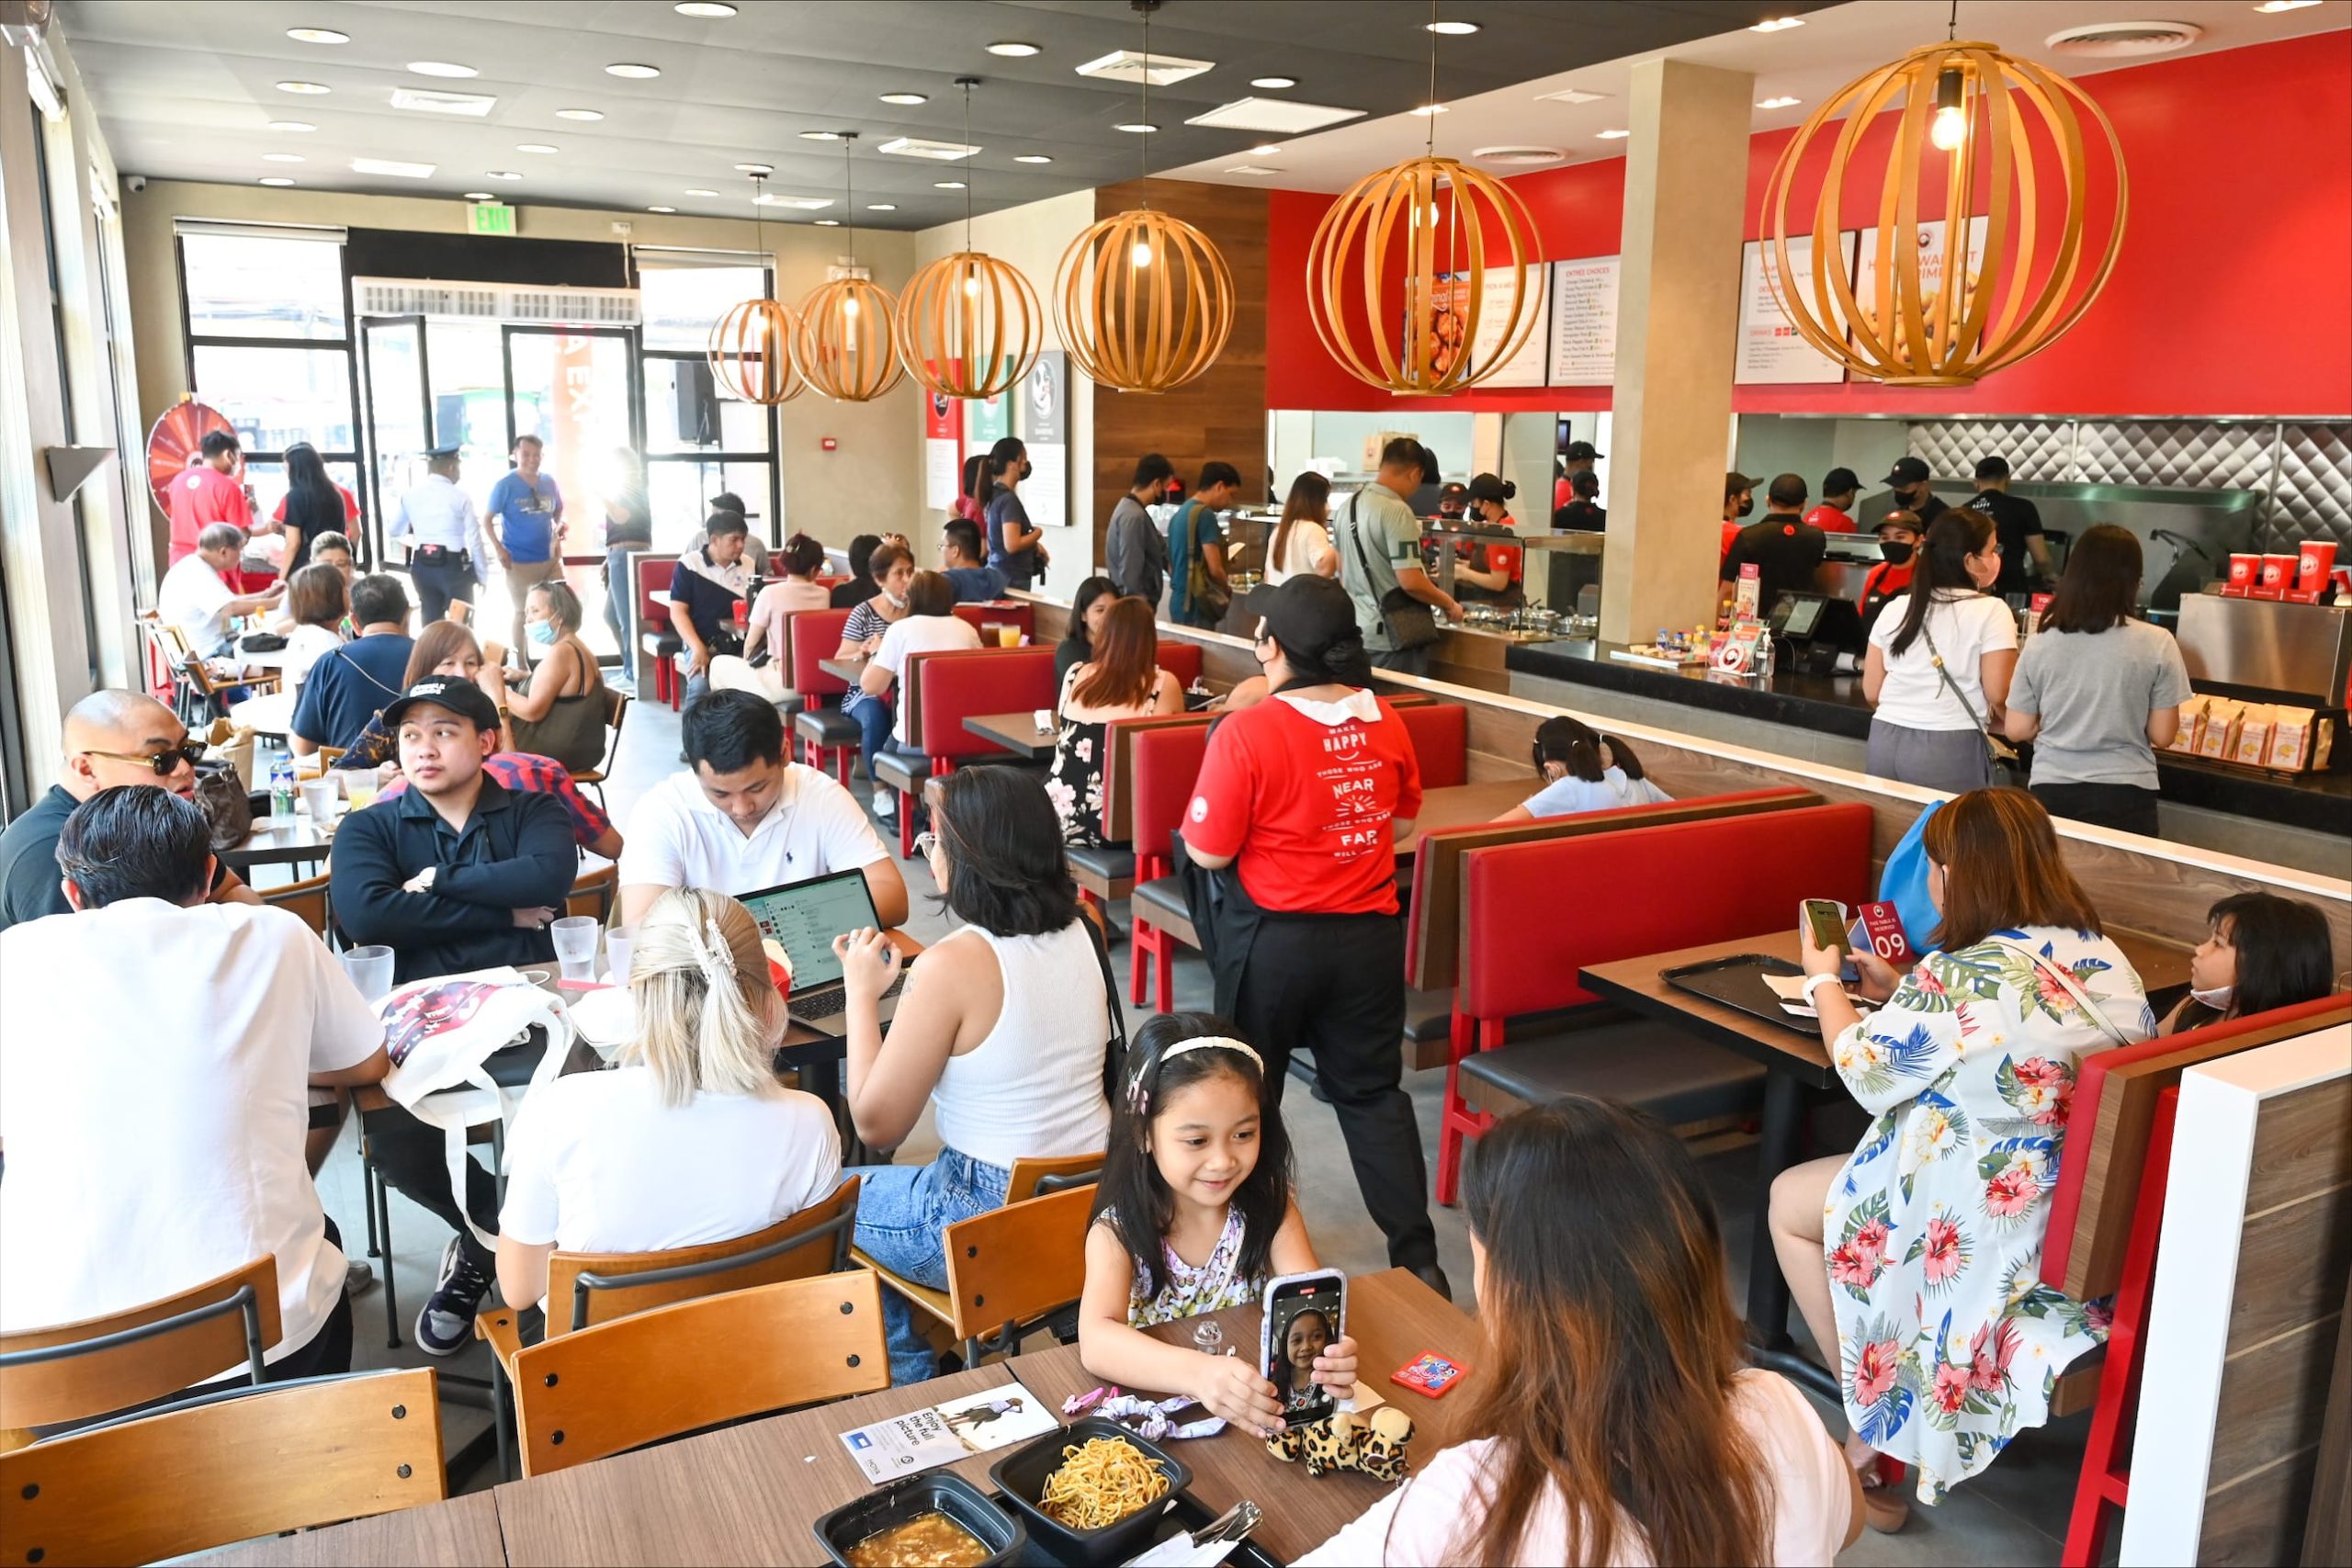 The new Panda Express store in San Pedro, Laguna, offers a variety of entrées with Chinese influences, including the bestselling dish, The Original Orange Chicken®.